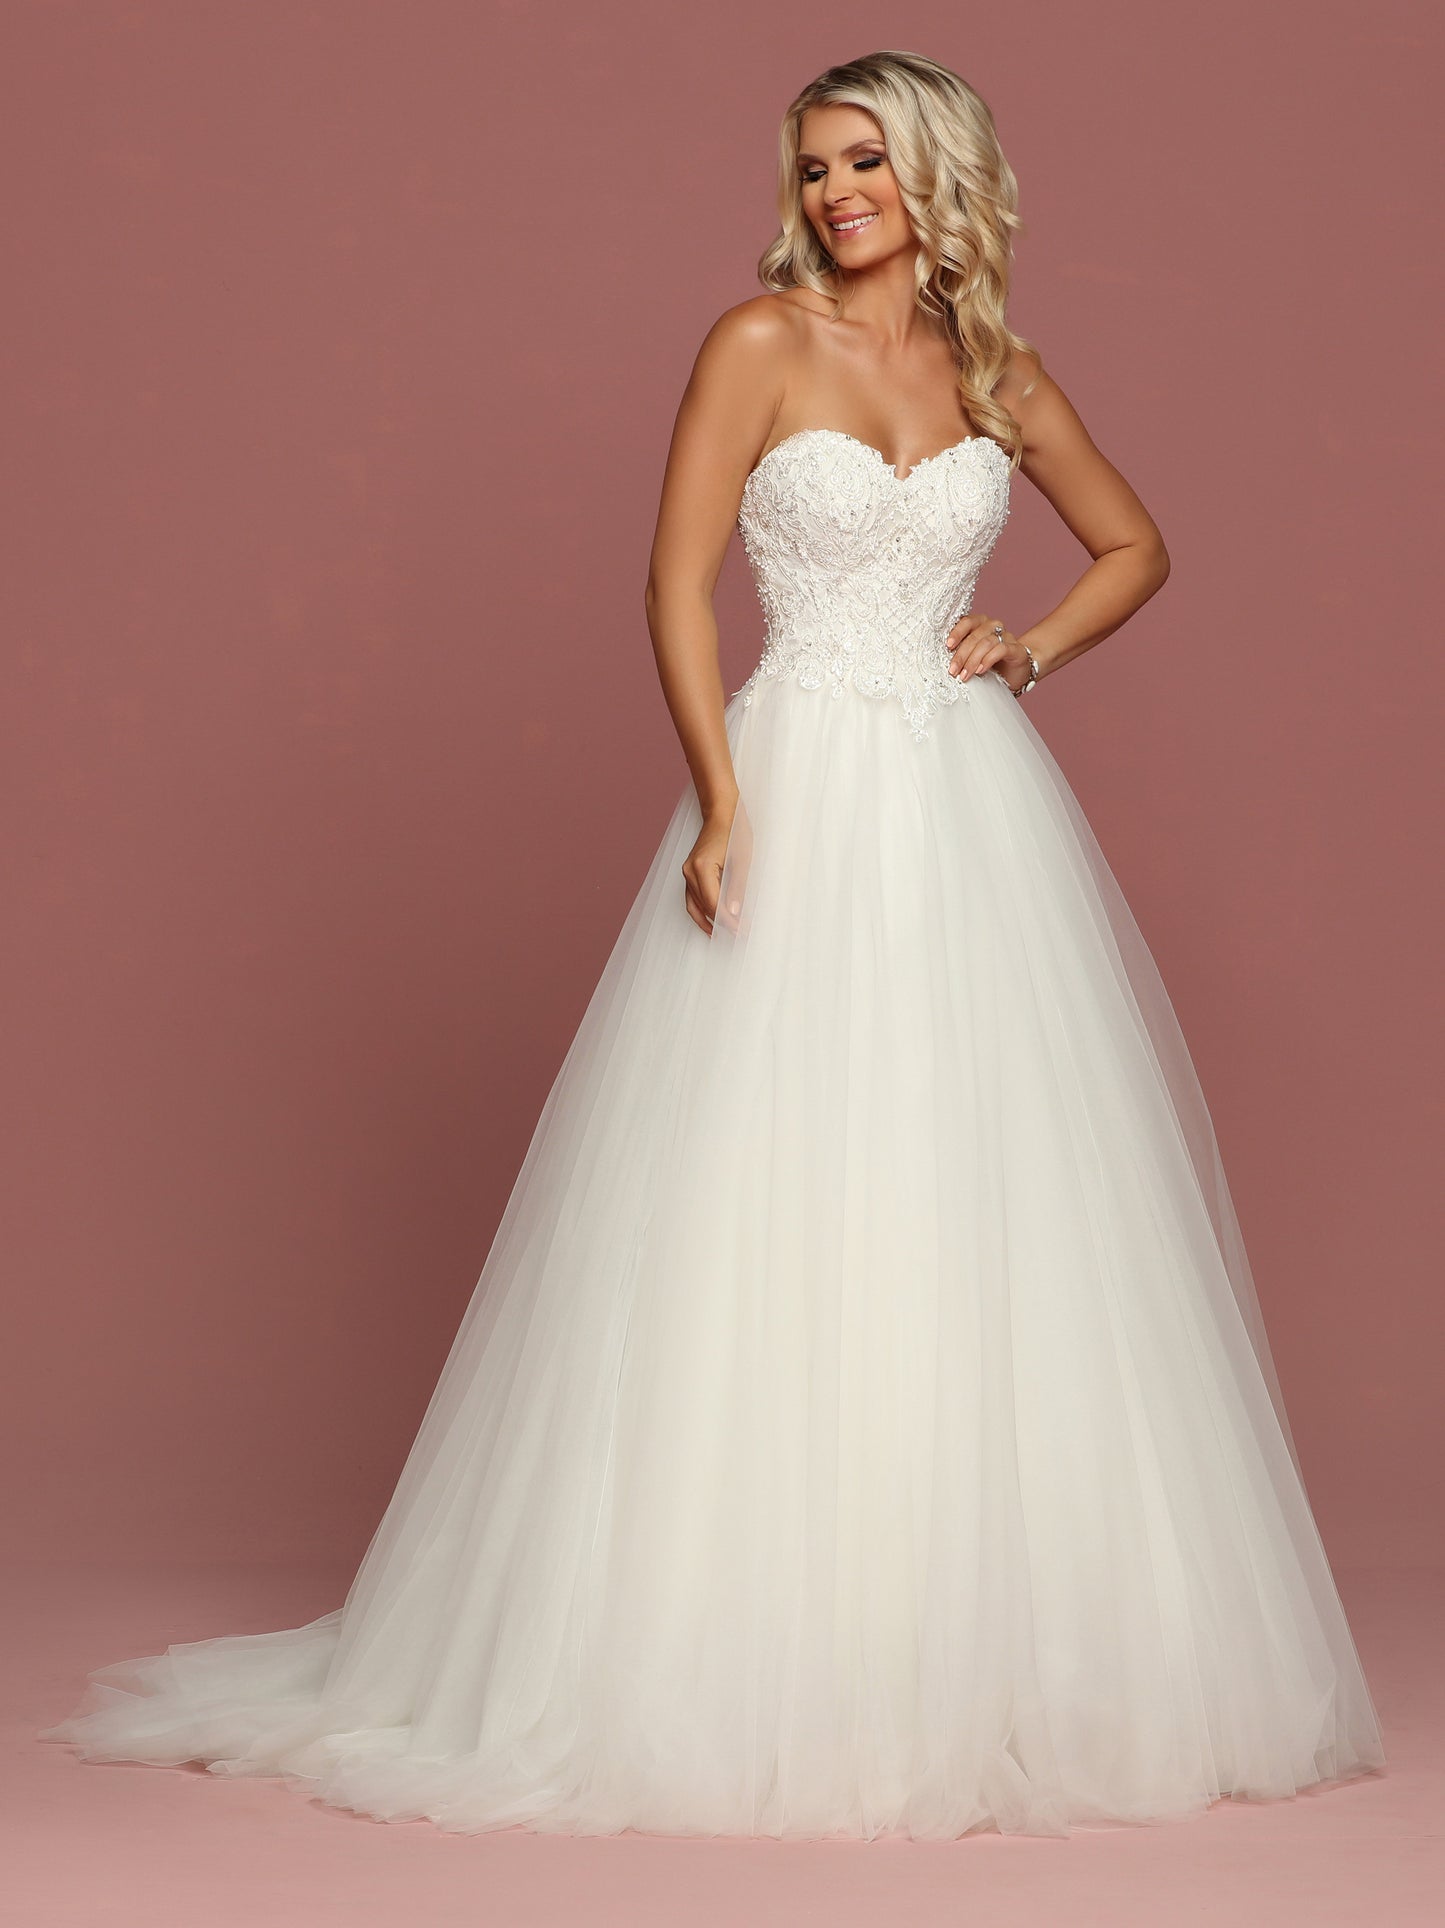 Davinci Bridal 50487 is a strapless sweetheart Tulle ballgown wedding dress. Featuring an Embellished lace bodice cascading into the lush tulle skirt. Corset Lace up back.  Available for 1-2 Week Delivery!!!  Available Sizes: 2,4,6,8,10,12,14,16,18,20  Available Colors: Ivory